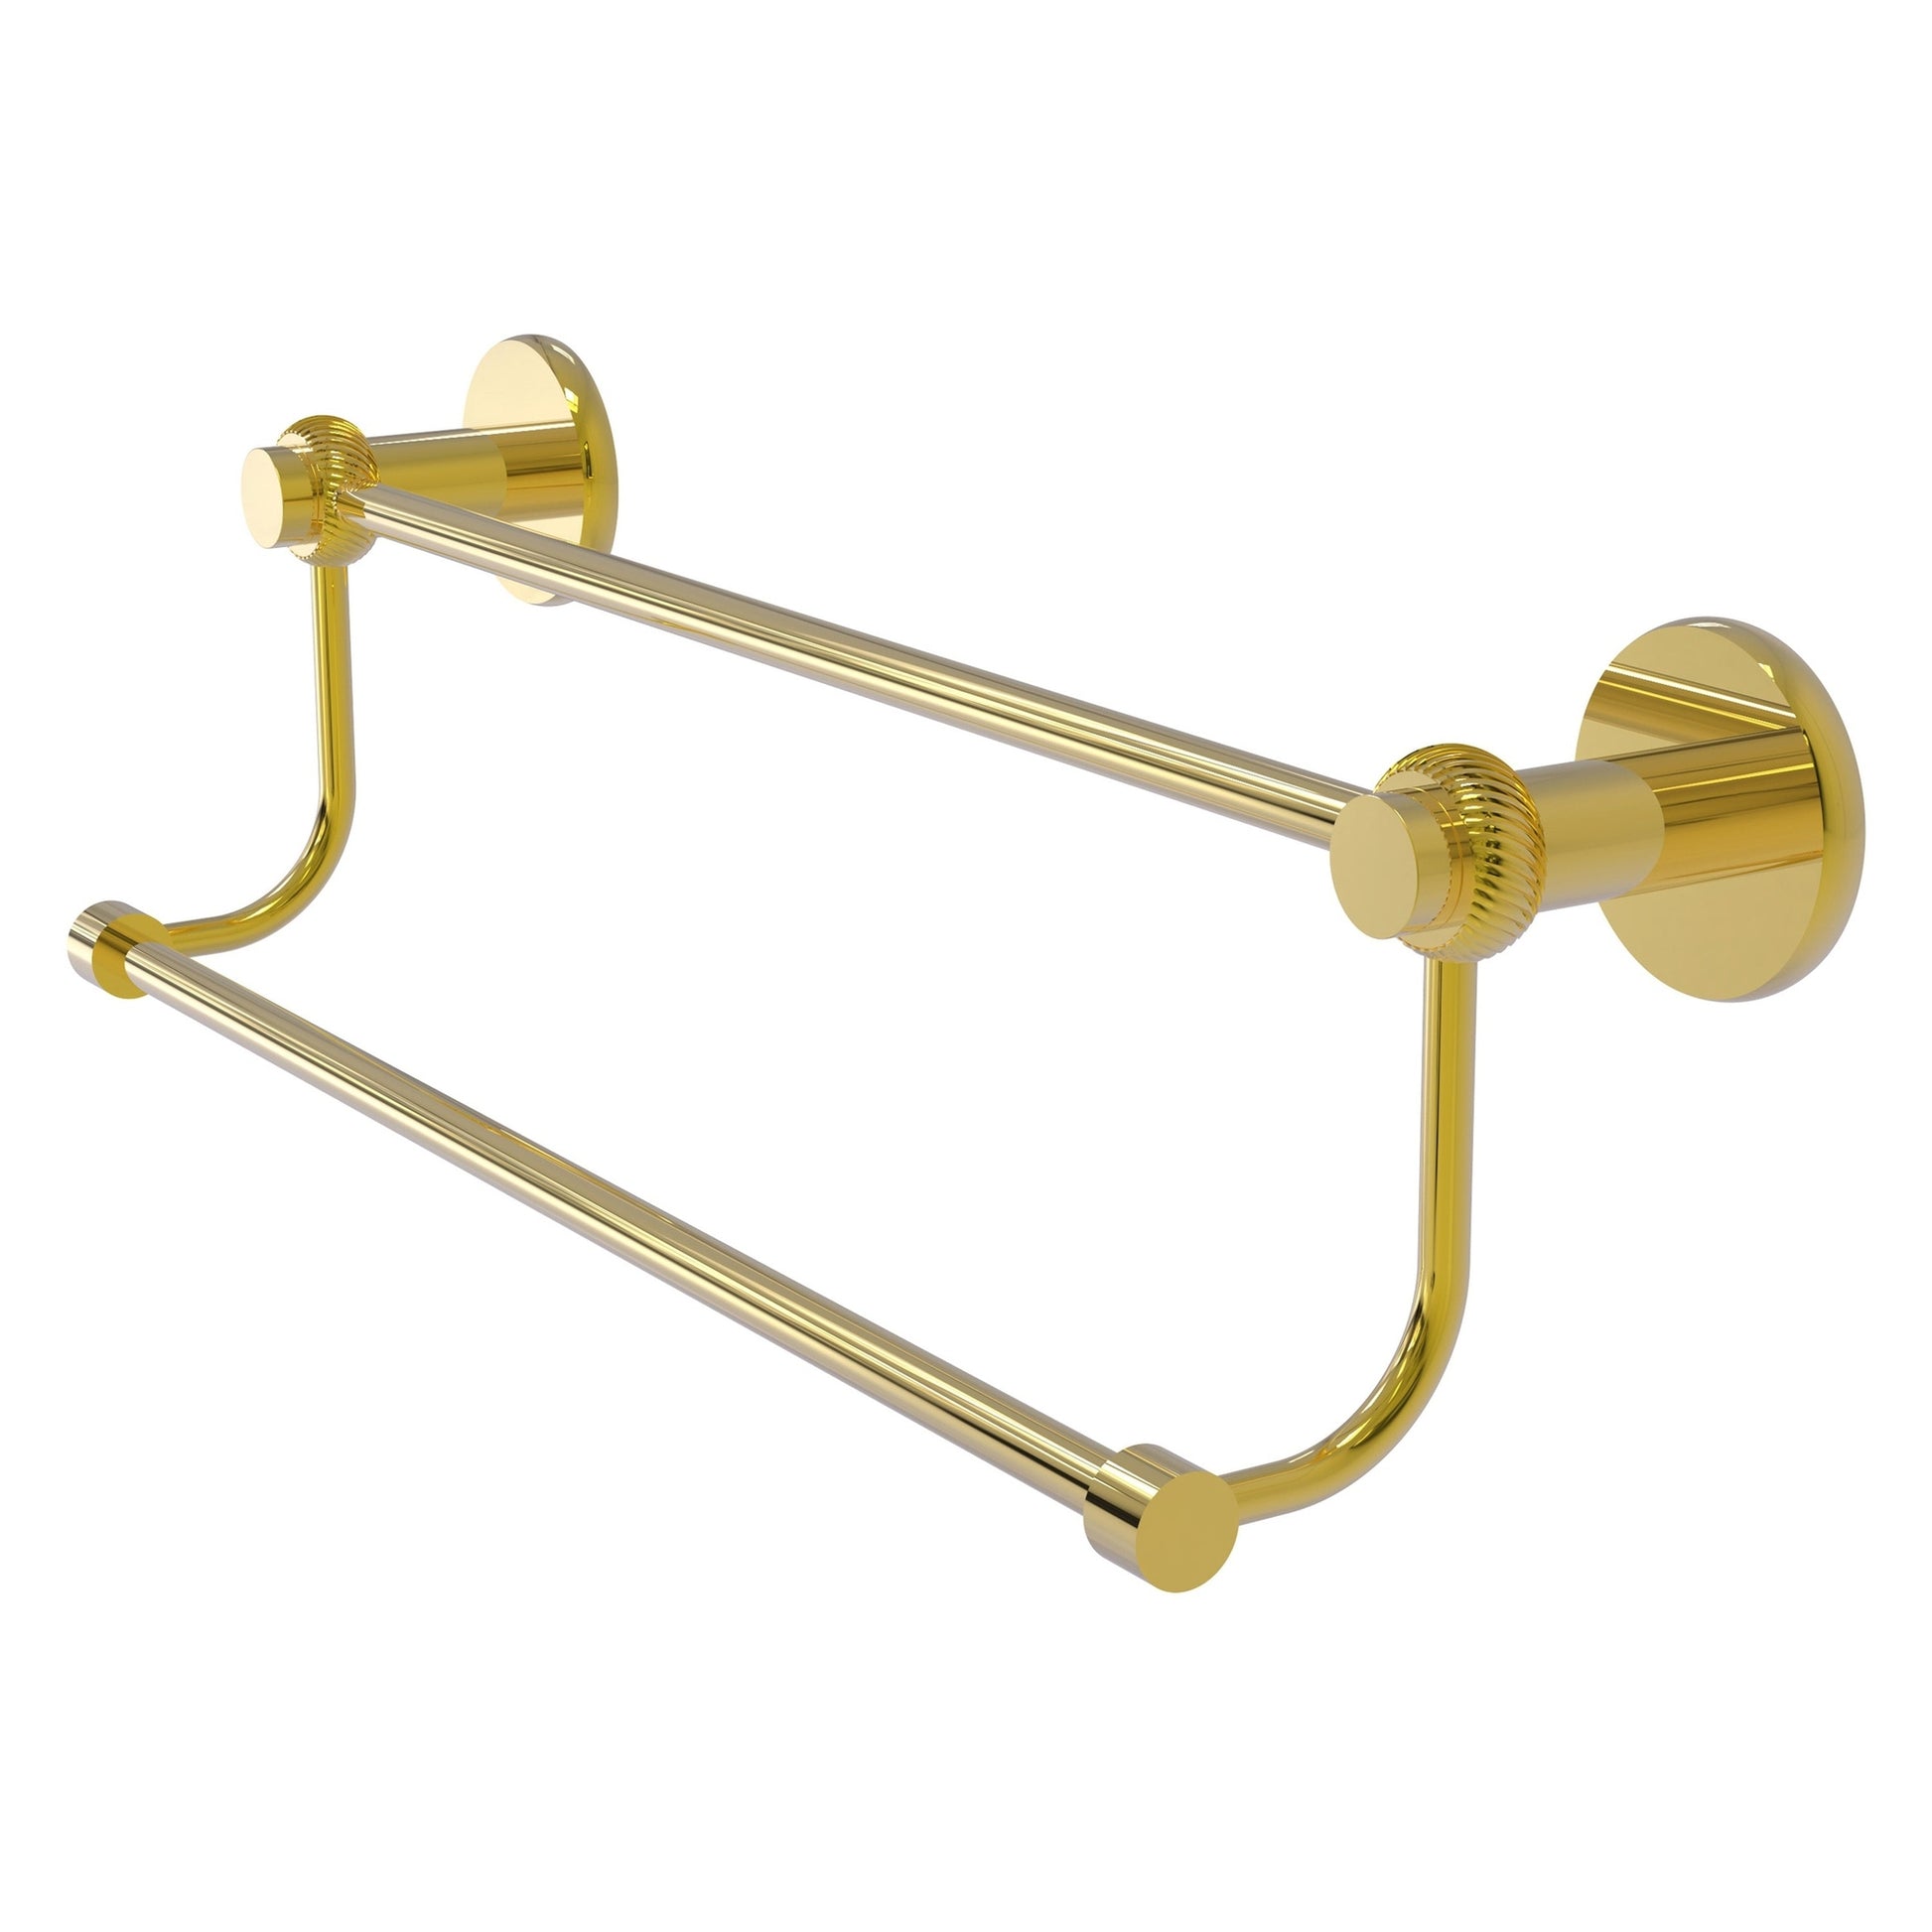 Allied Brass Mercury 24" x 26.5" Polished Brass Solid Brass Double Towel Bar With Twist Accents